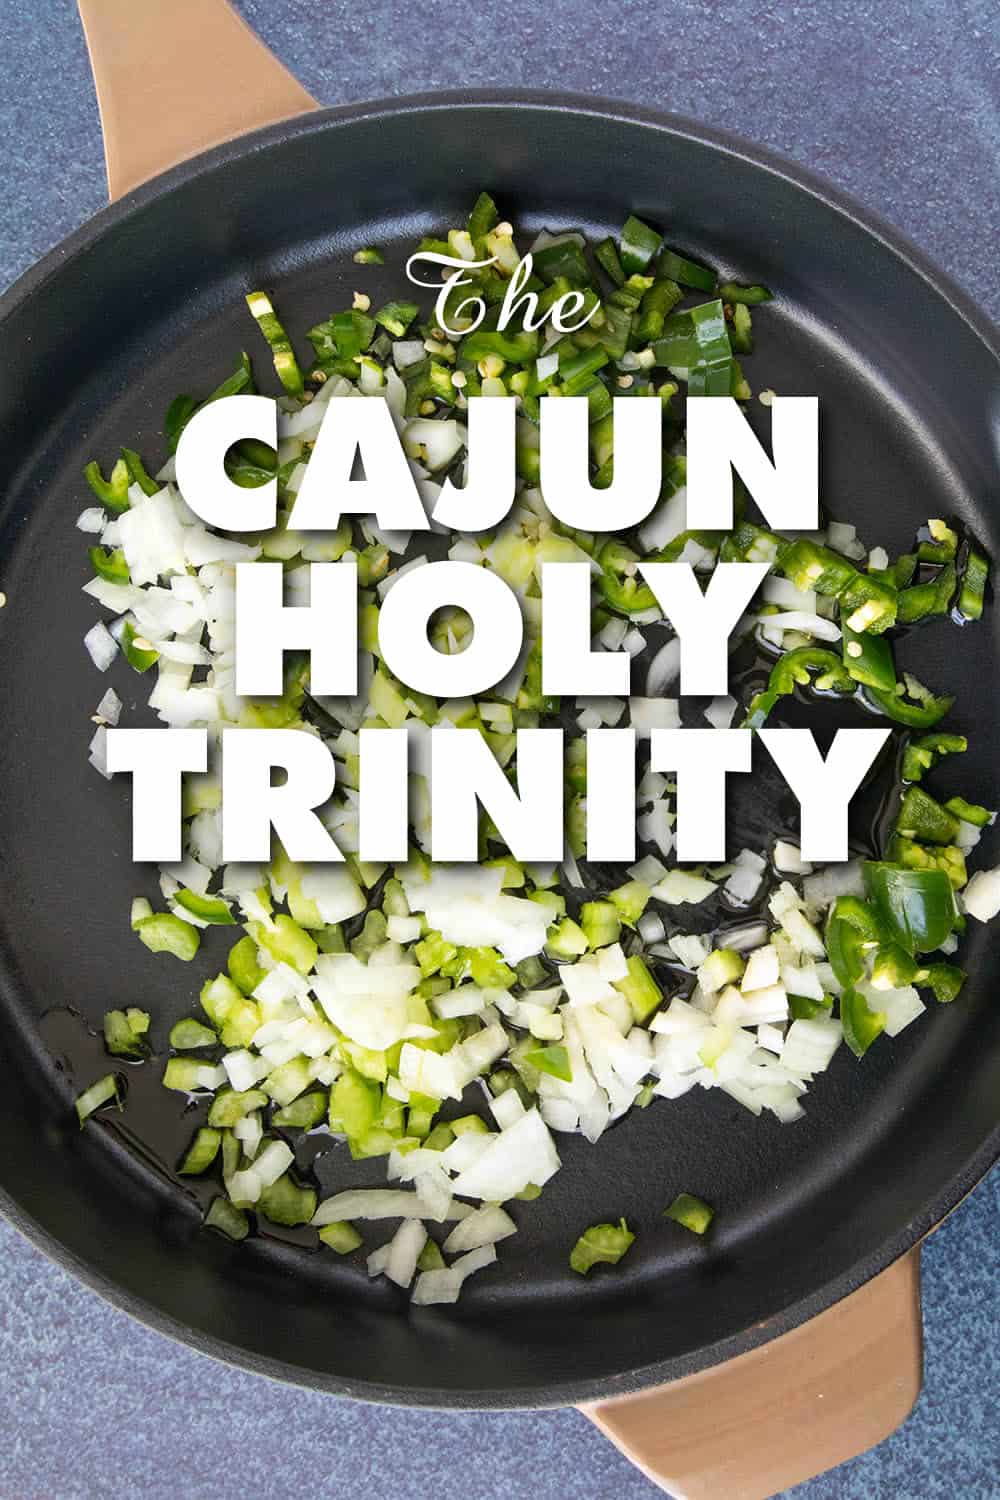 All about the Cajun Holy Trinity - Essential to Cajun and Creole Cuisine